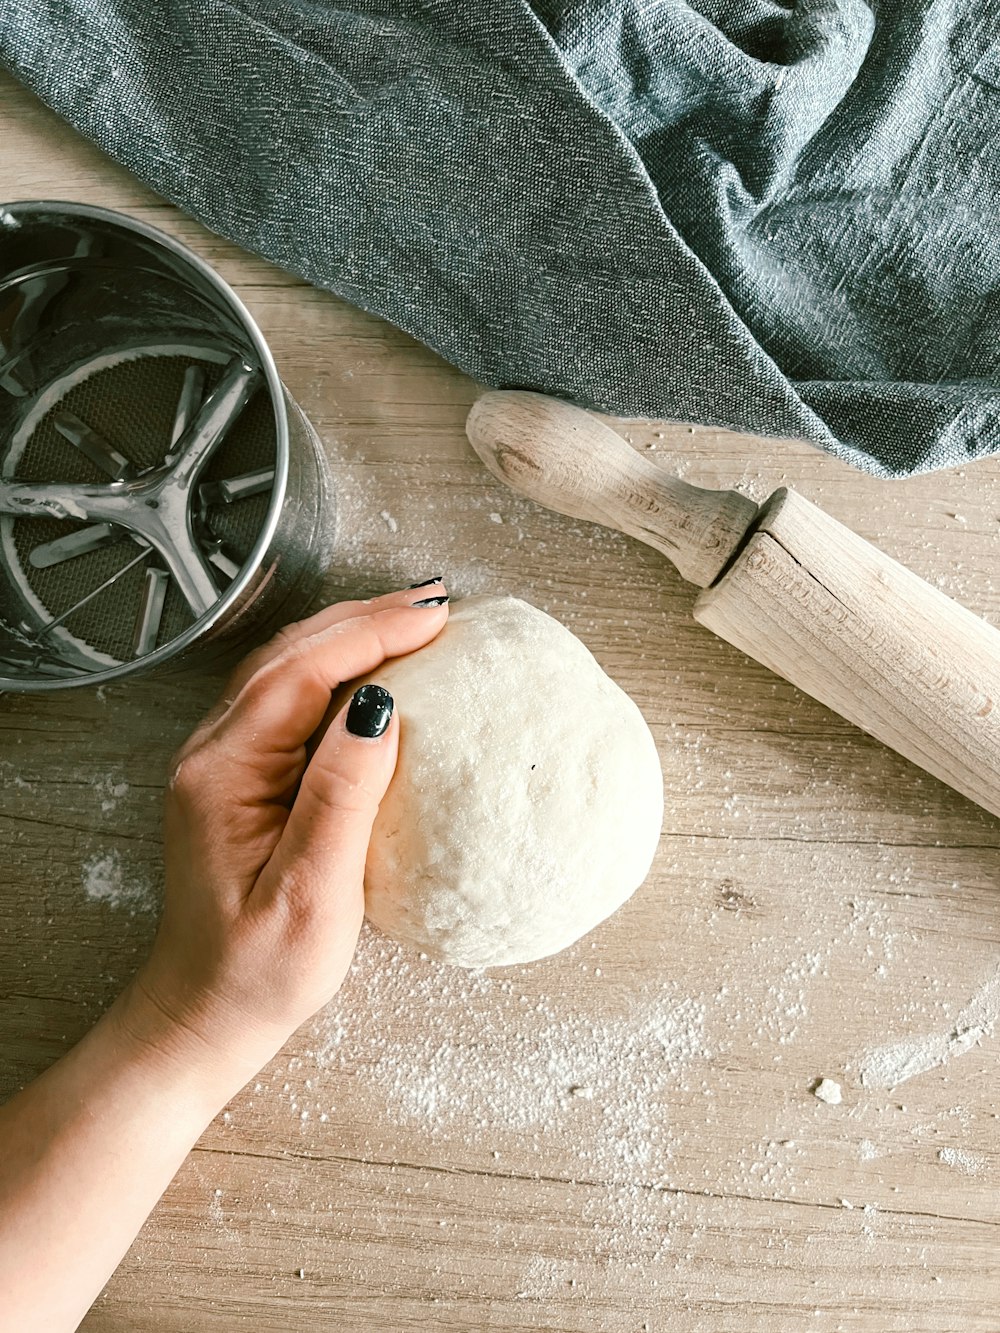 a person is kneading dough on a wooden table